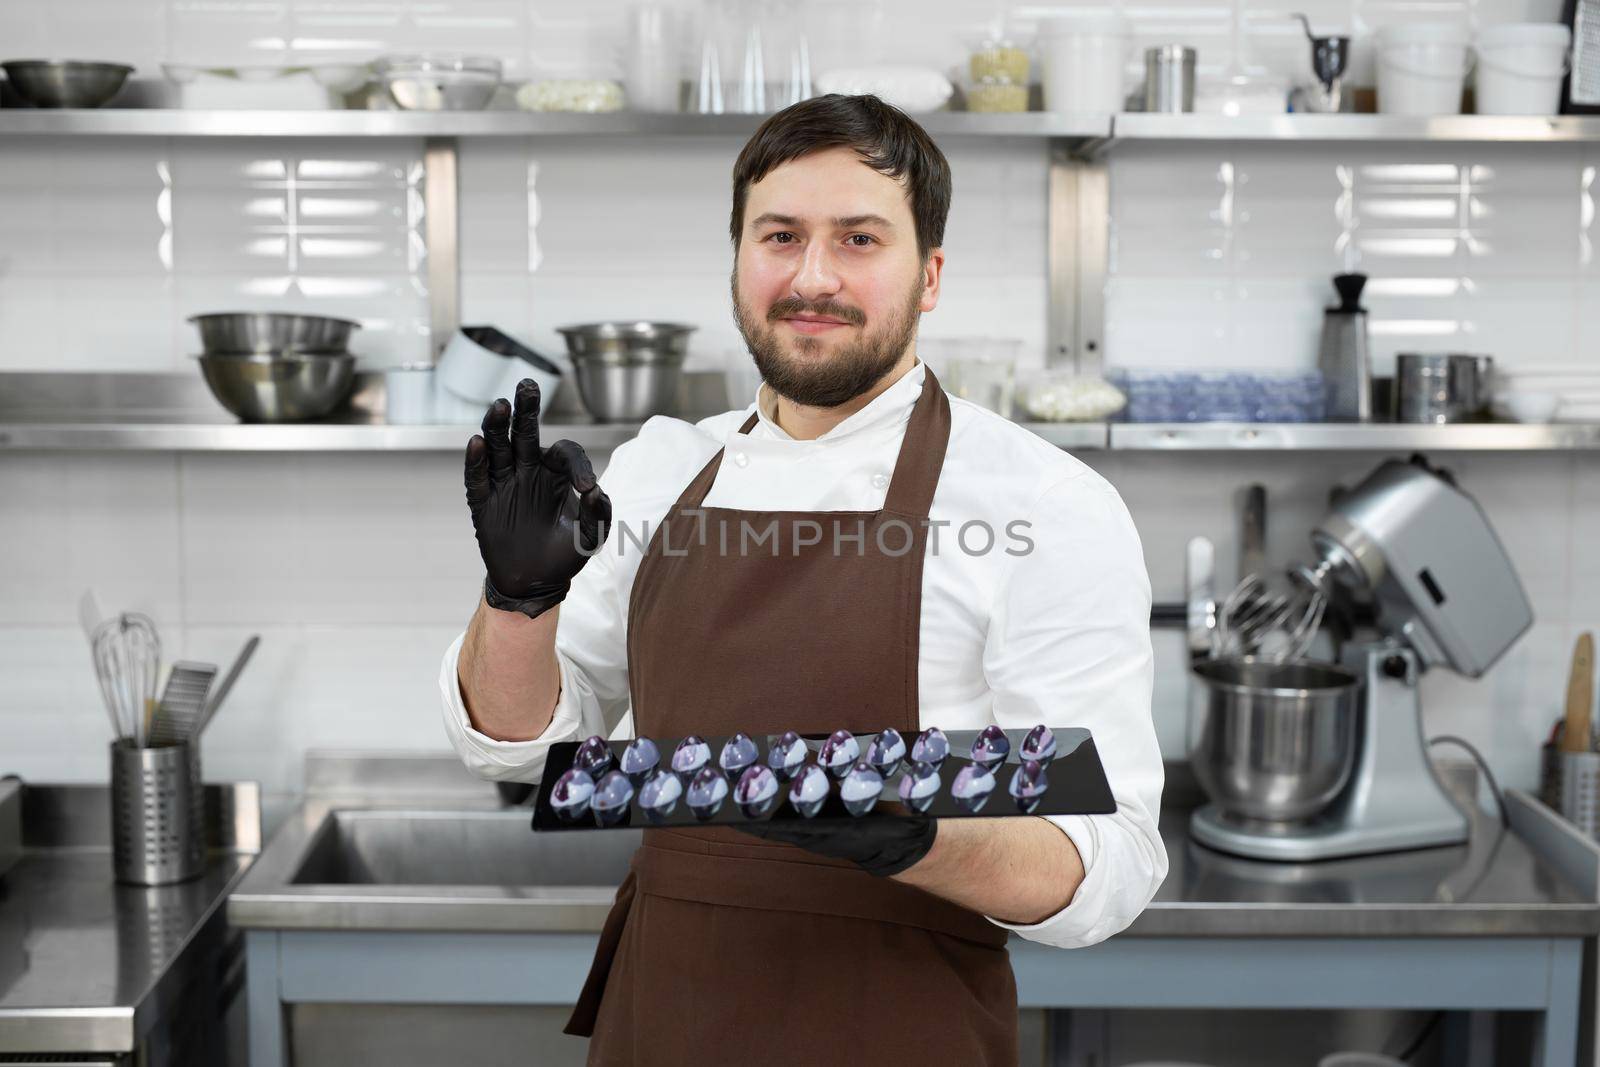 Male pastry chef in a professional kitchen holds handmade chocolates in his hands and shows the ok sign.